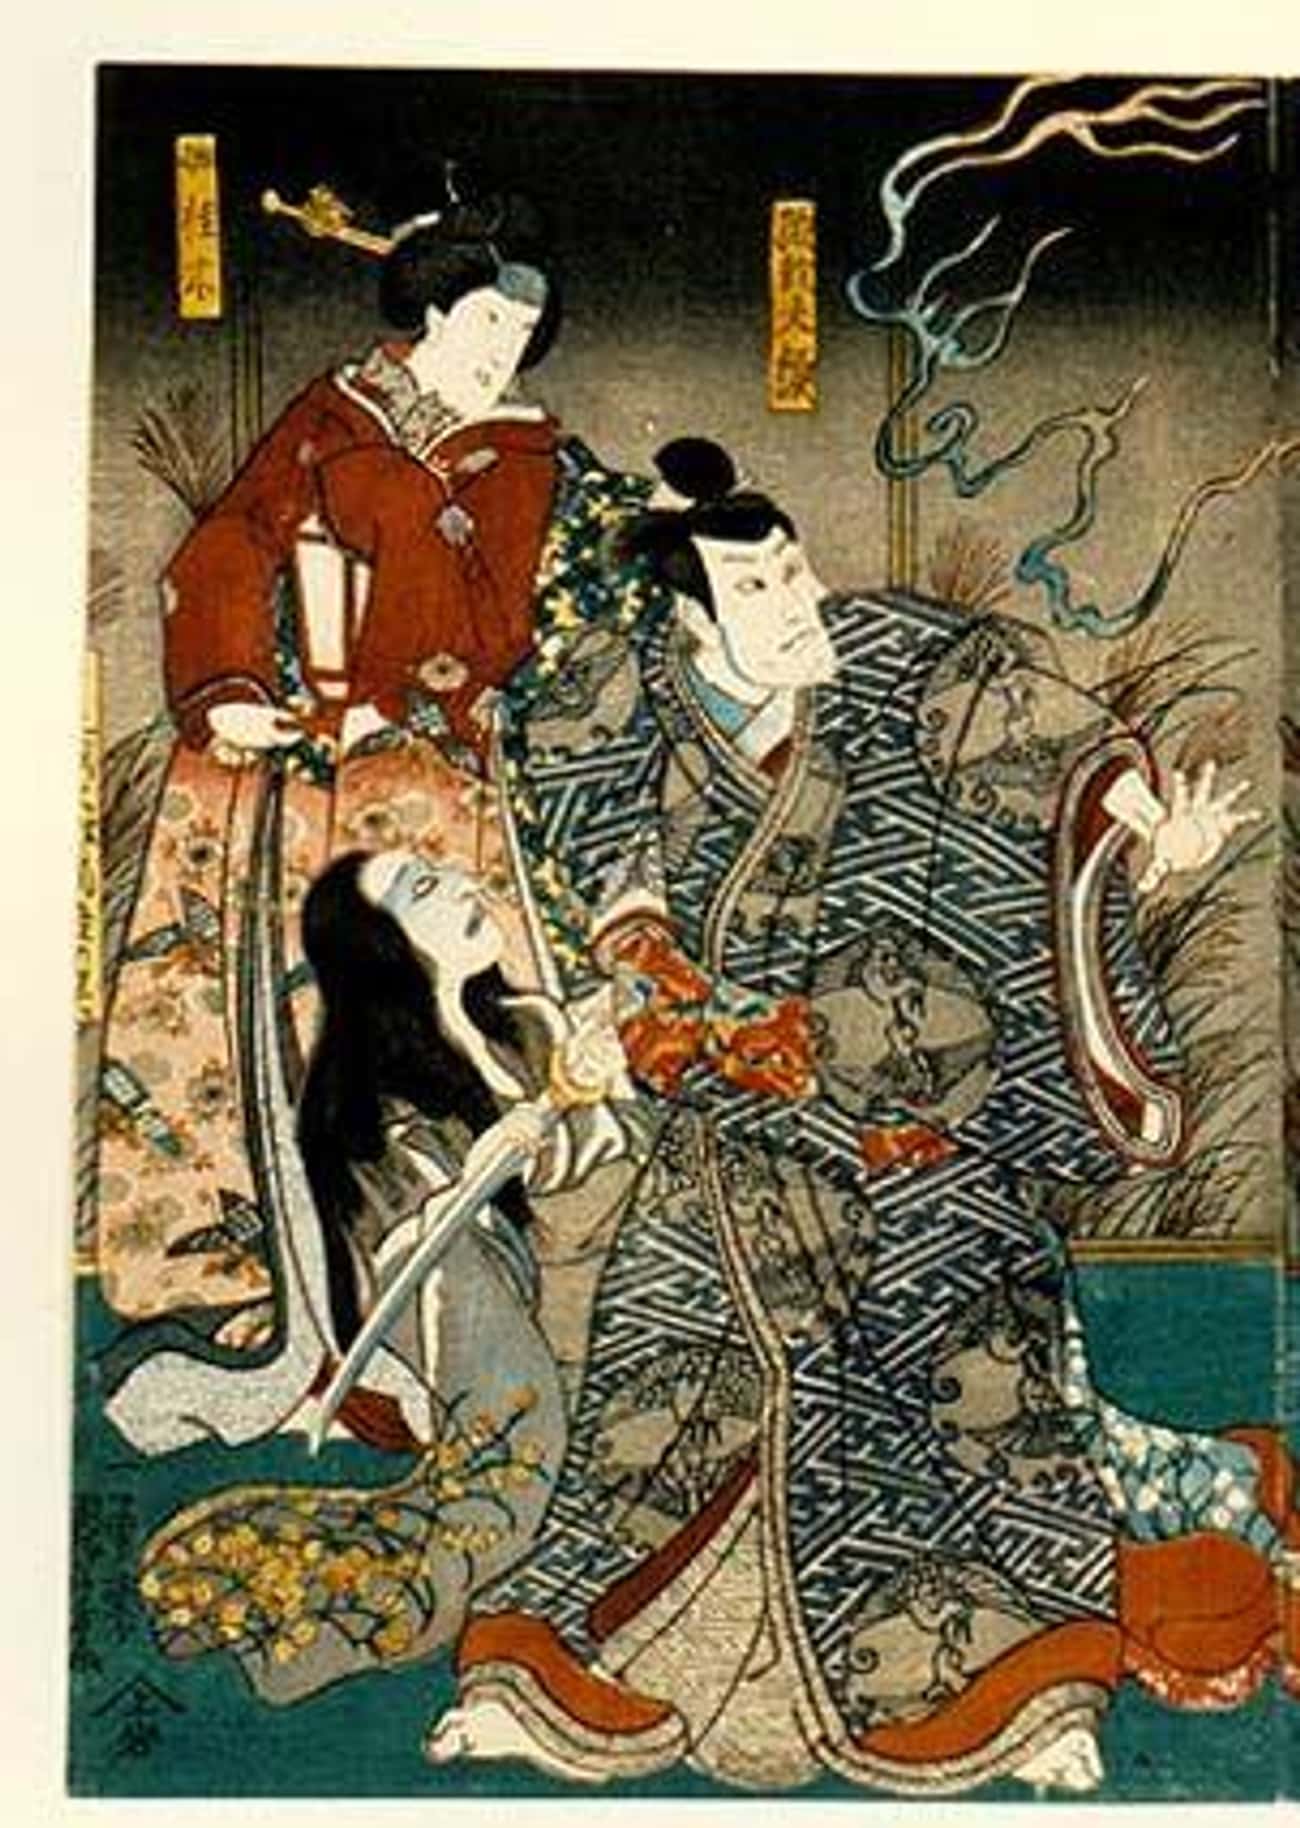 Fathers Had Their Daughters Marry Samurai To Boost Their Social Status